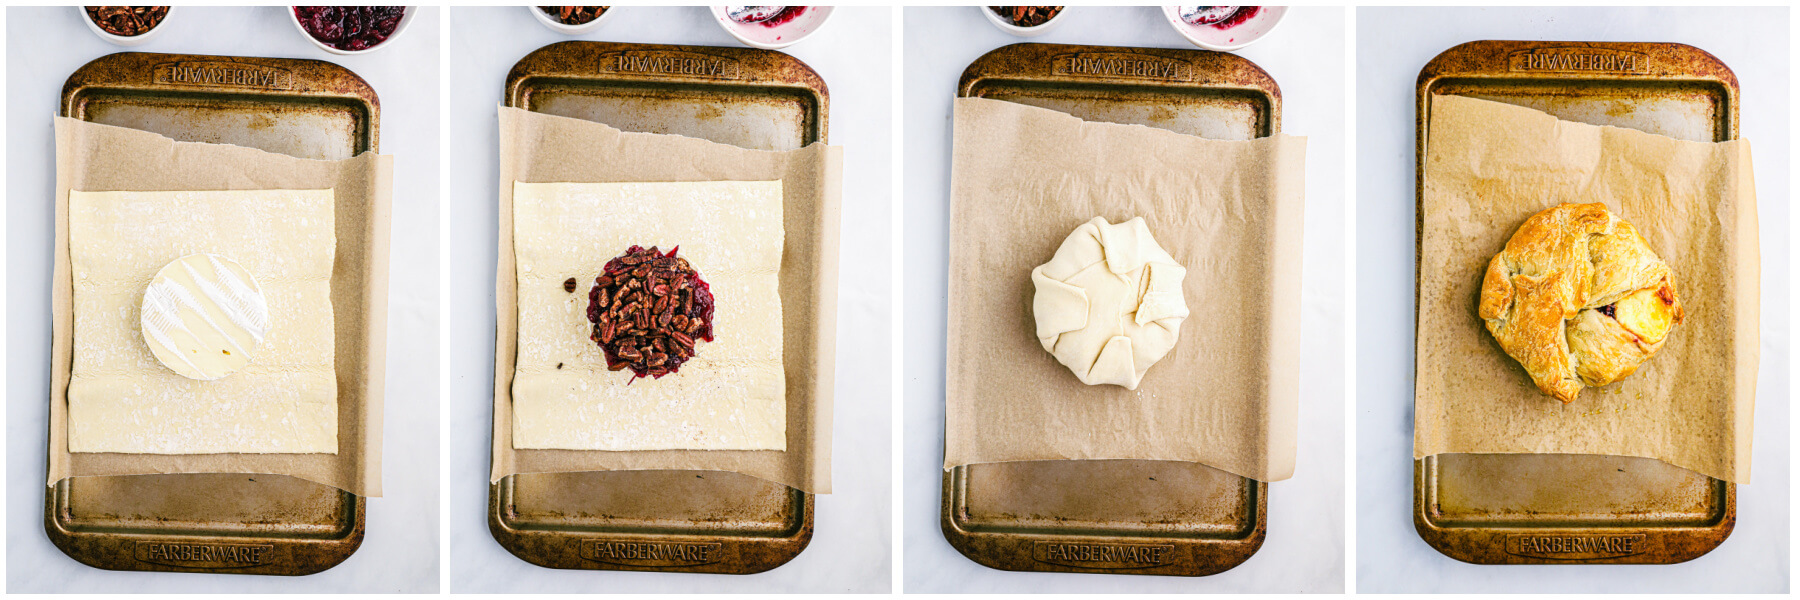 Process shots showing how to wrap a wheel of Brie cheese with puff pastry.